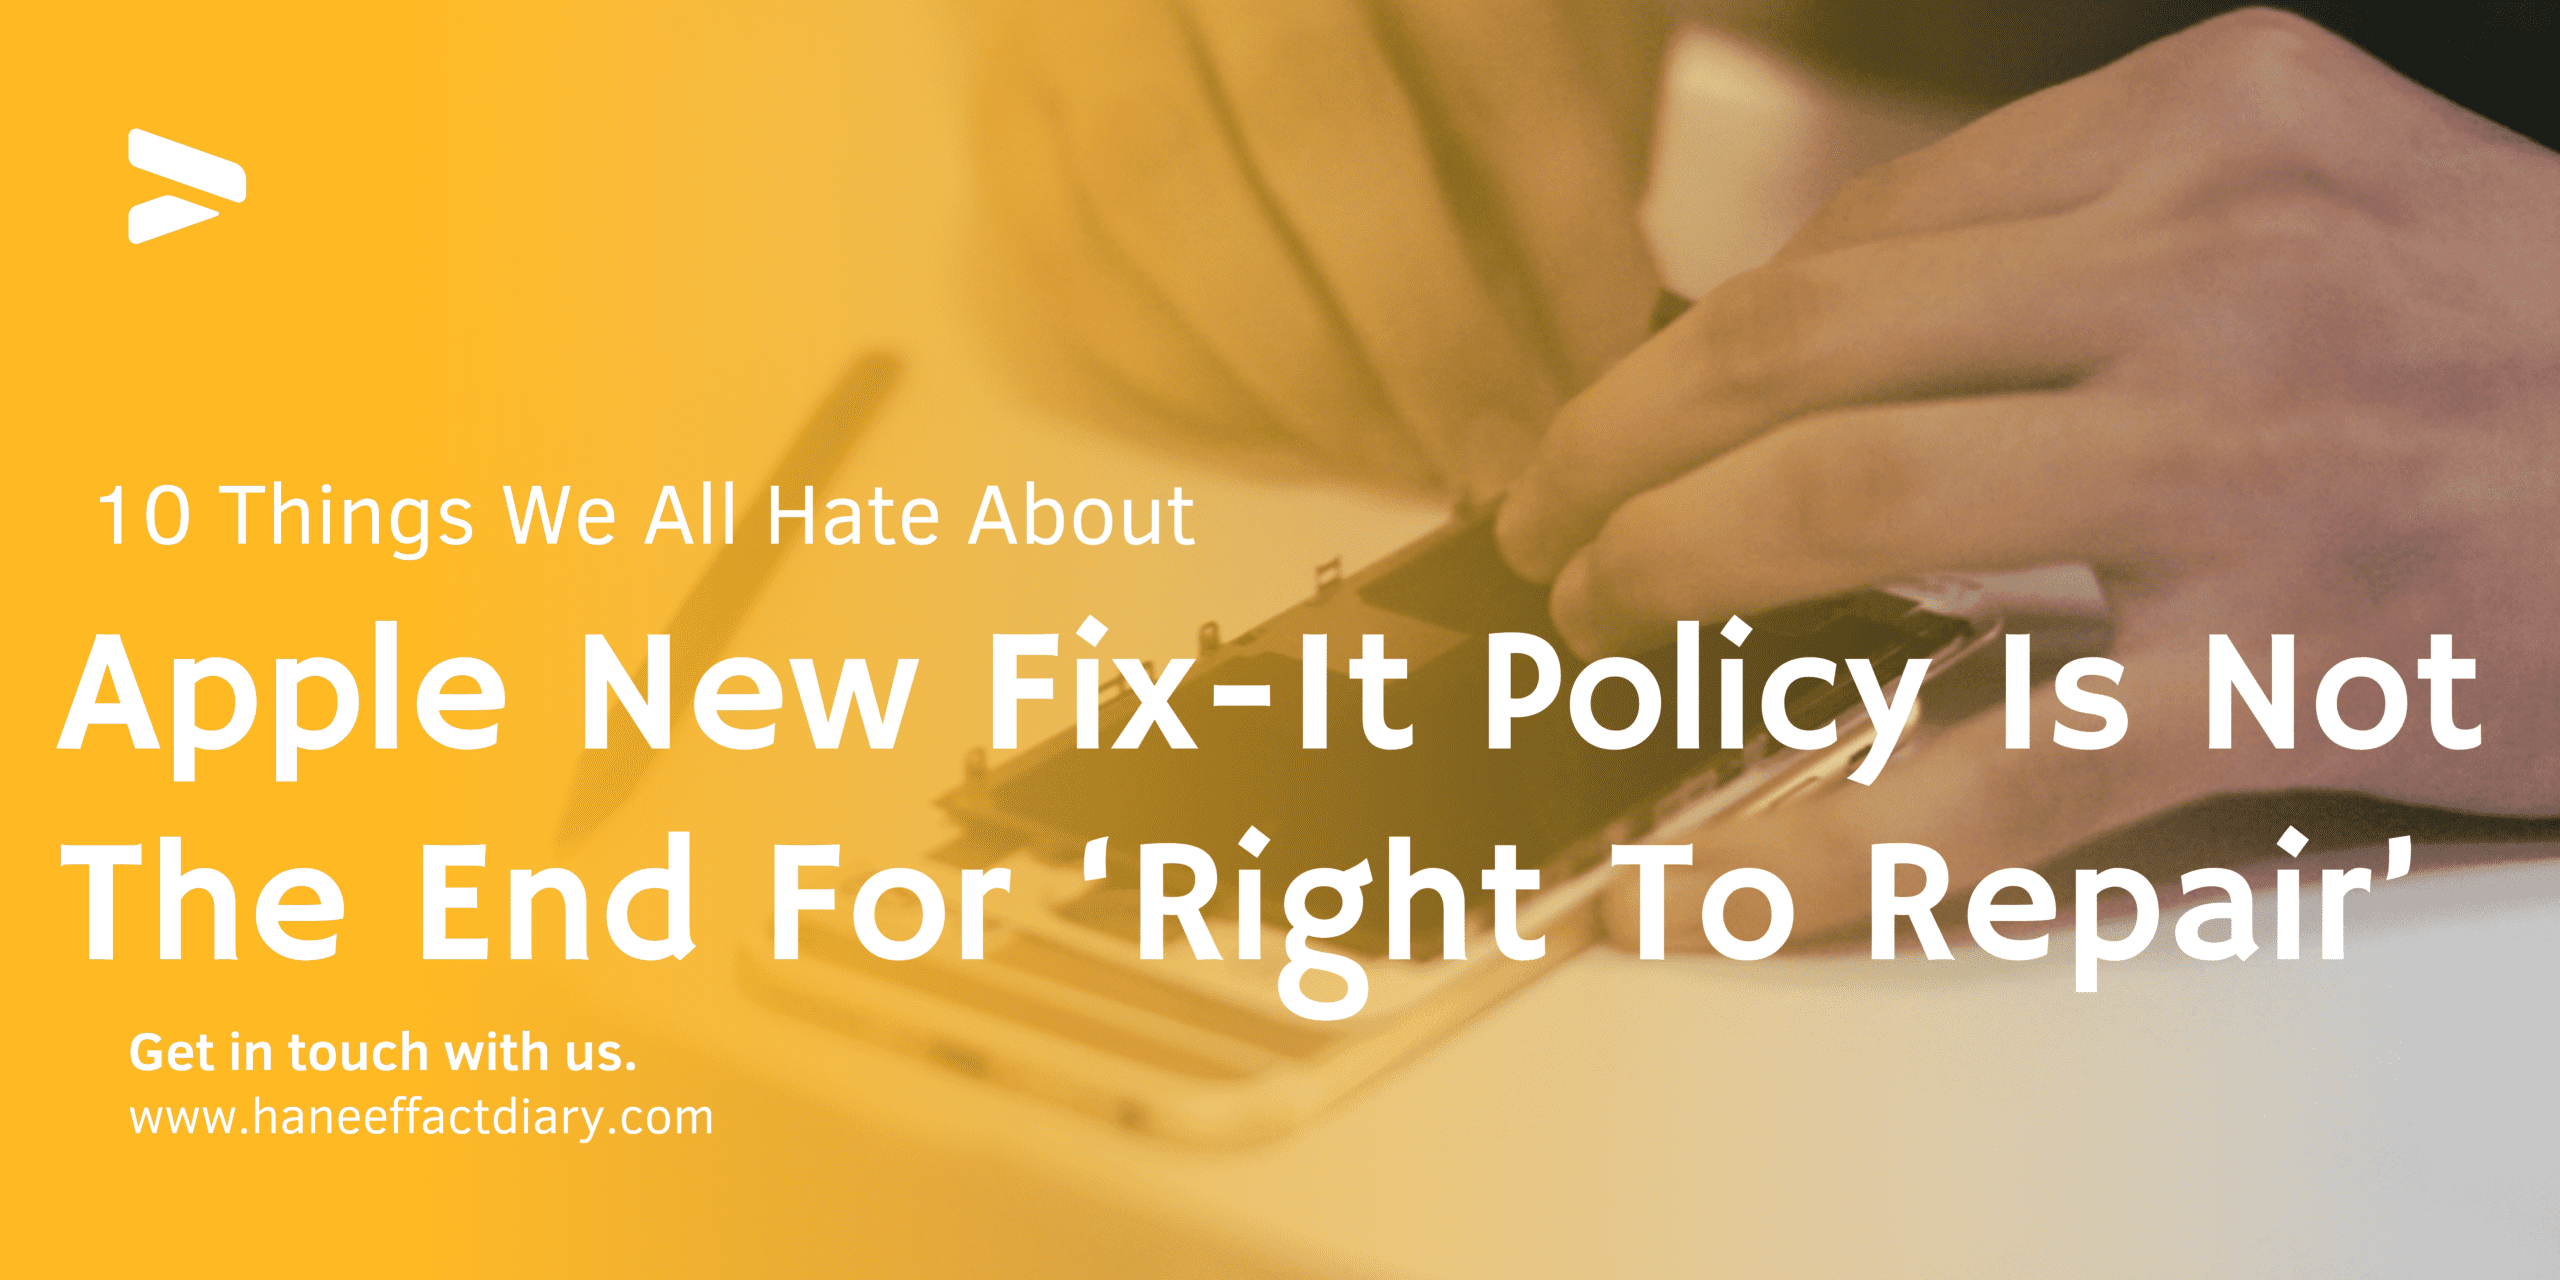 10-Things-We-All-Hate-About-Apple-New-Fix-It-Policy-Is-Not-The-End-For-‘Right-To-Repair